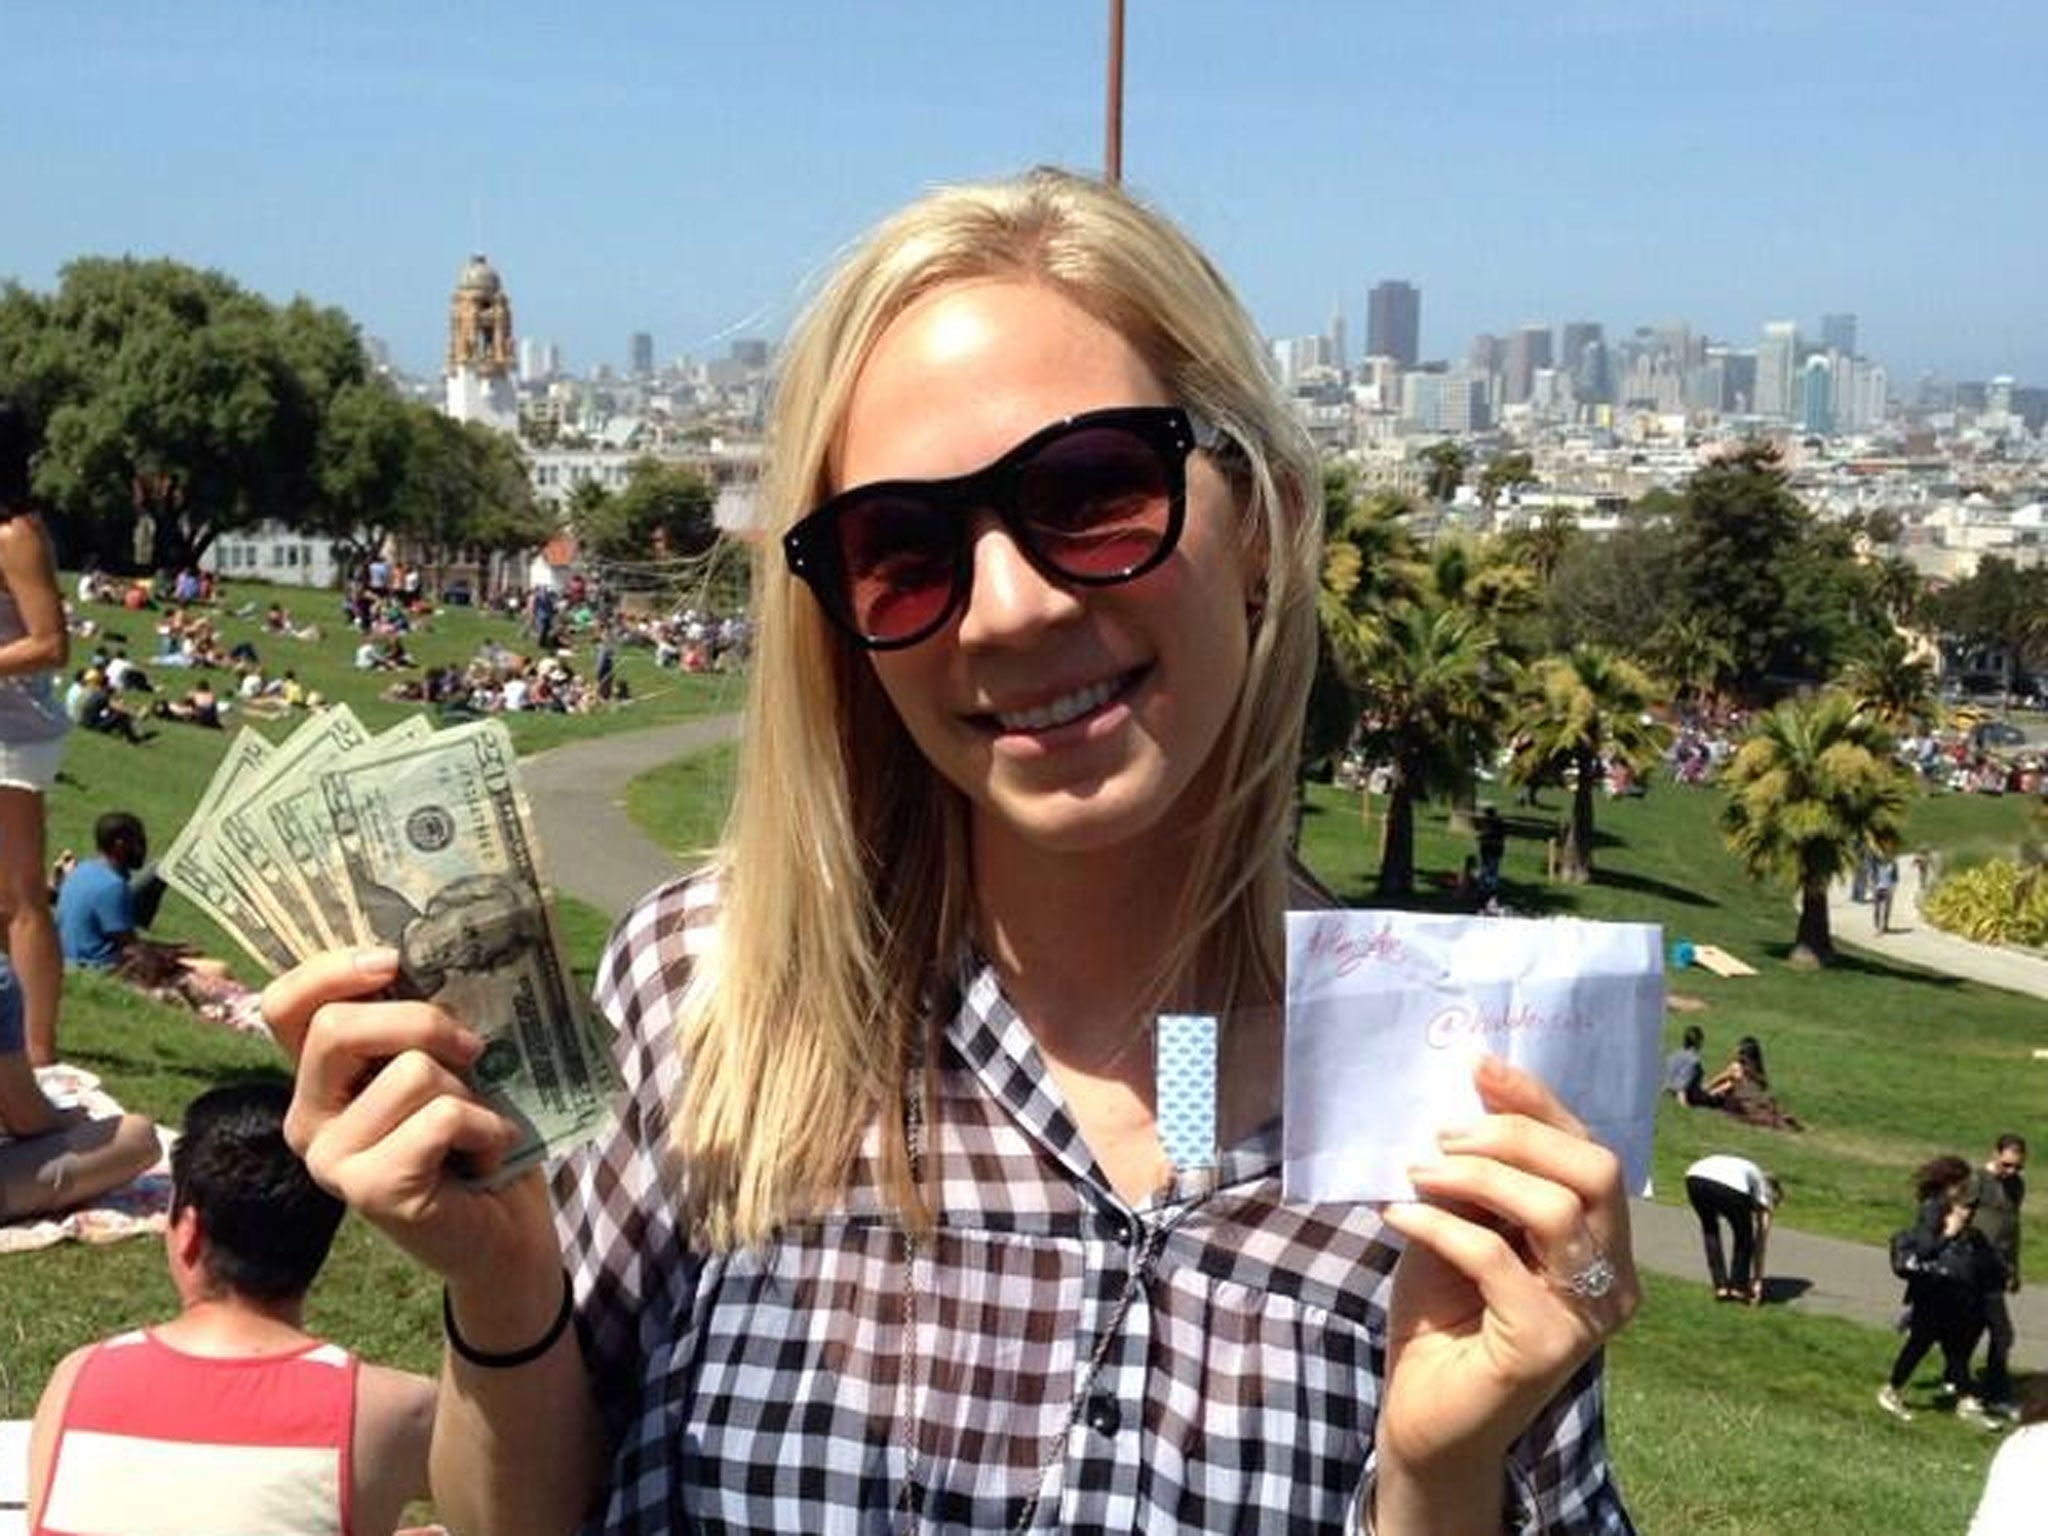 One lucky winner posted this image to Twitter saying @HiddenCash had 'made our day'